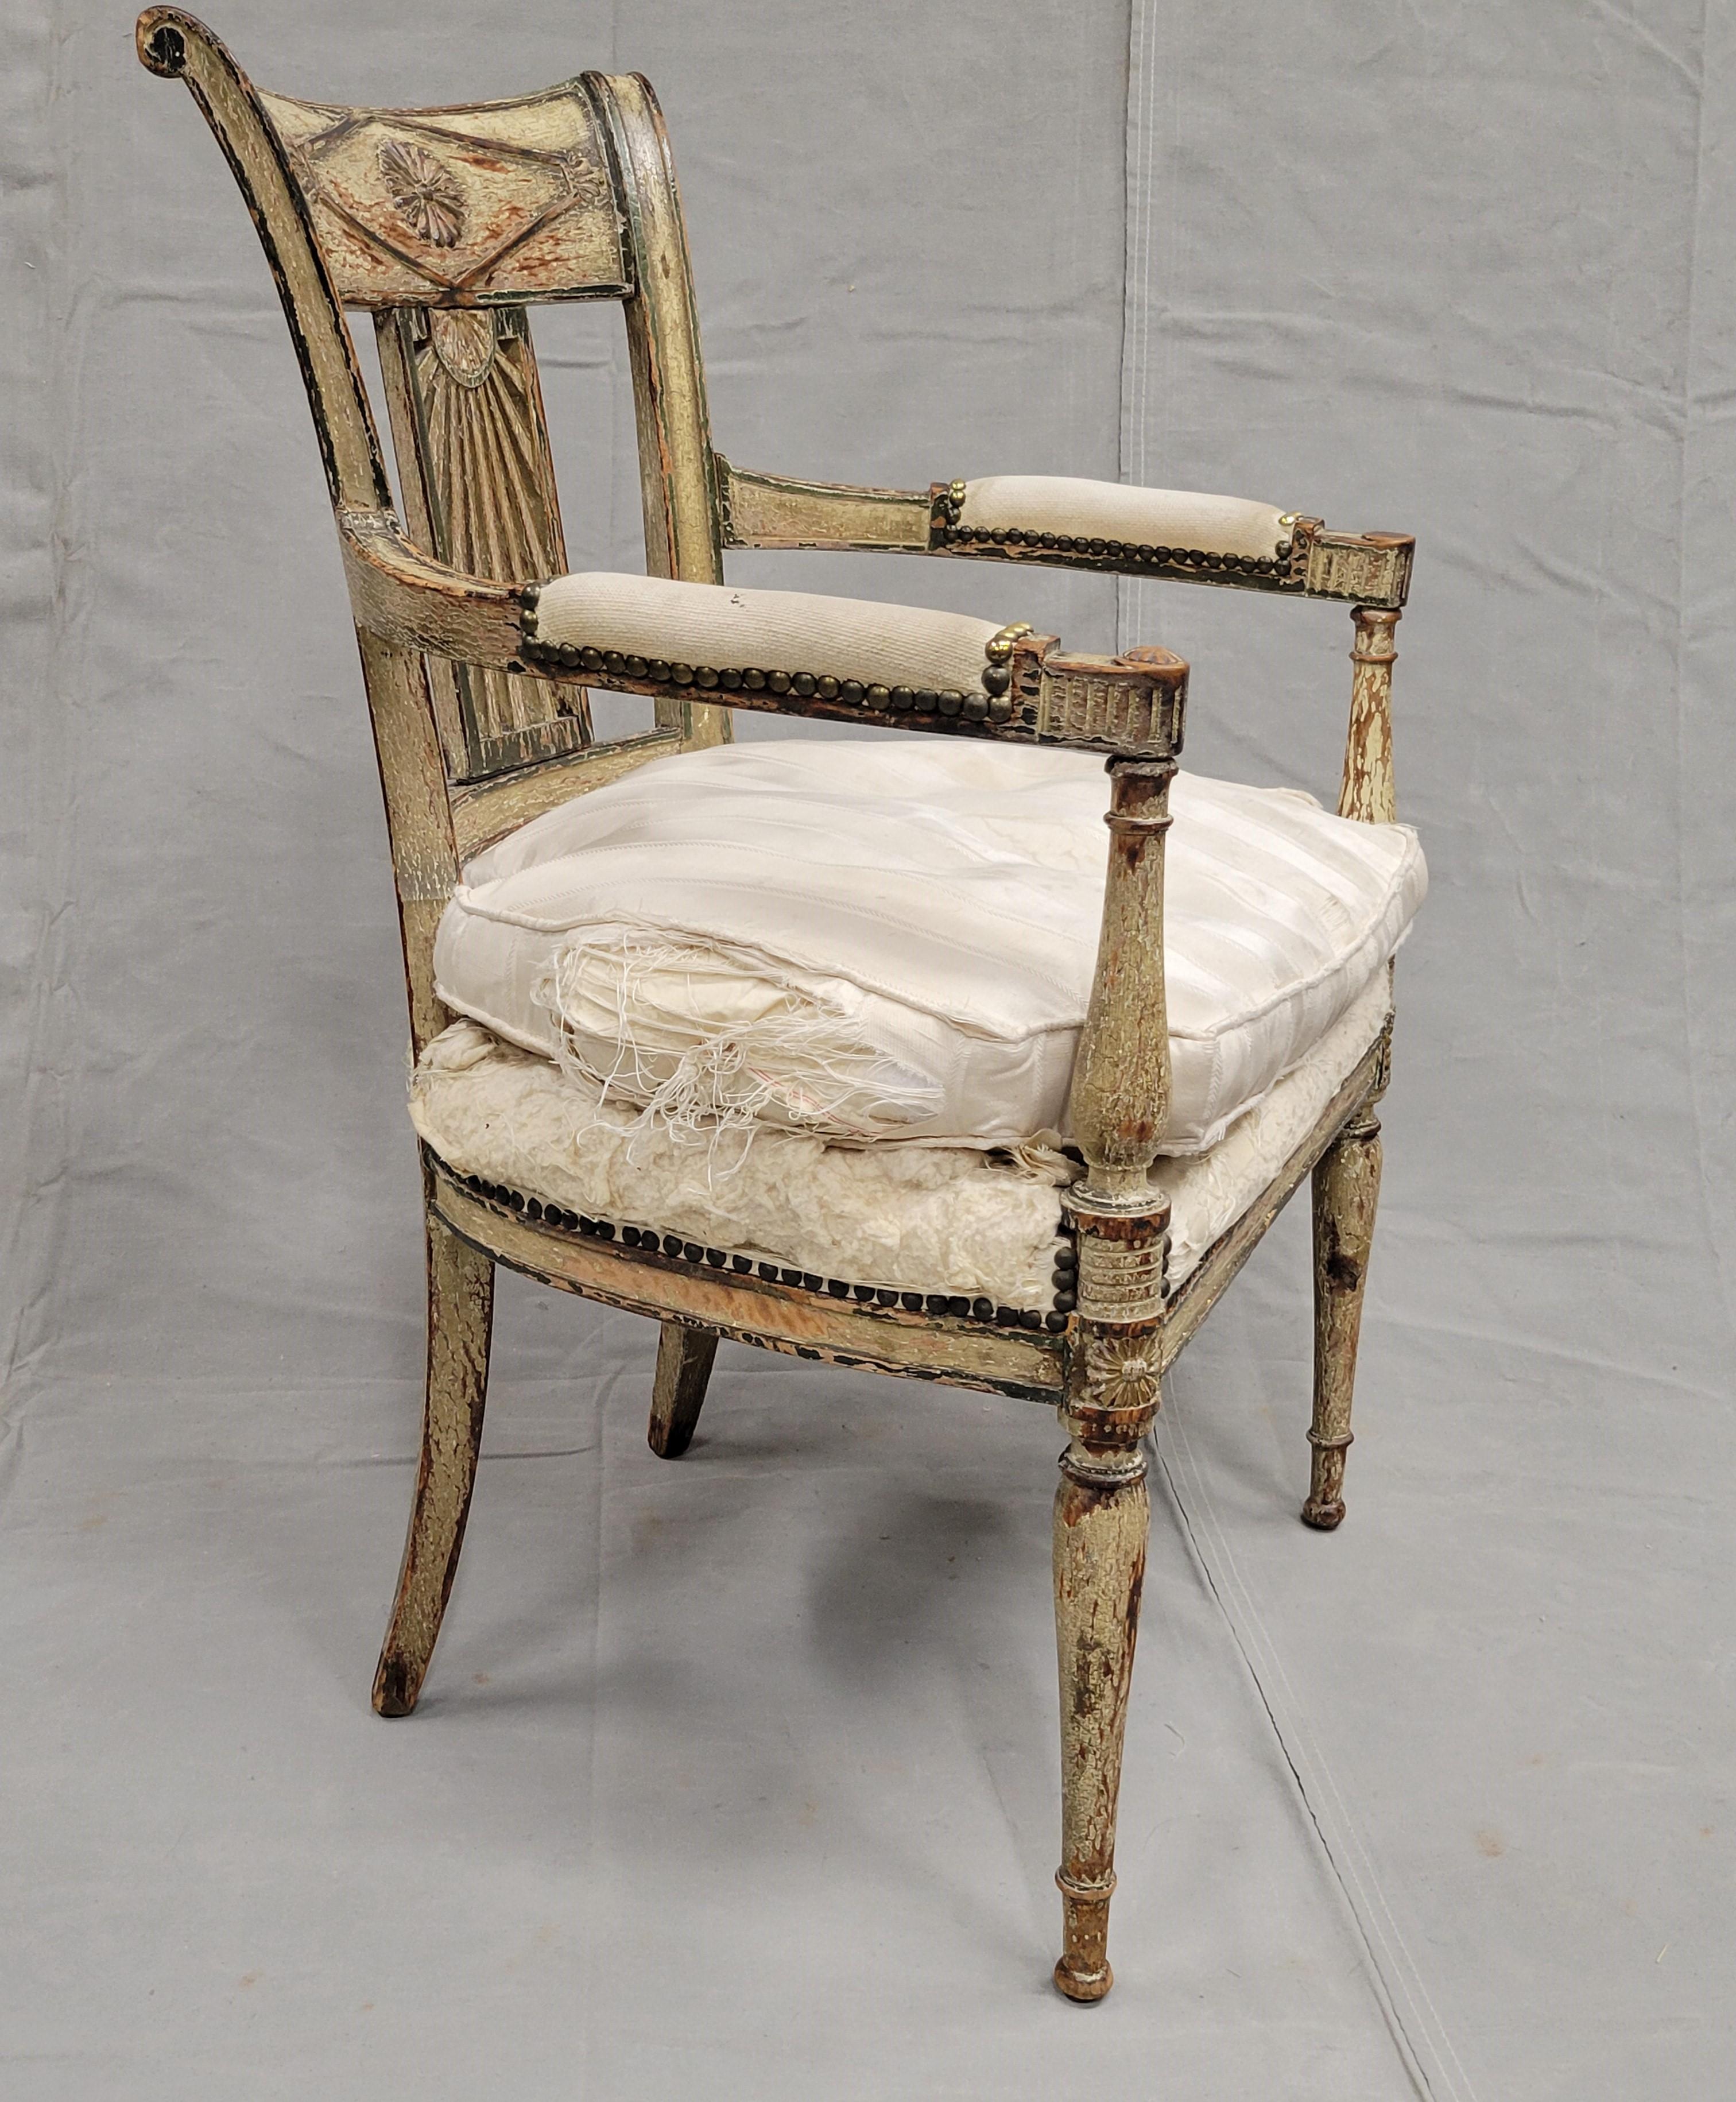 Antique Maison Jansen Style French Louis XVI Painted Fauteuil Chairs - a Pair For Sale 1